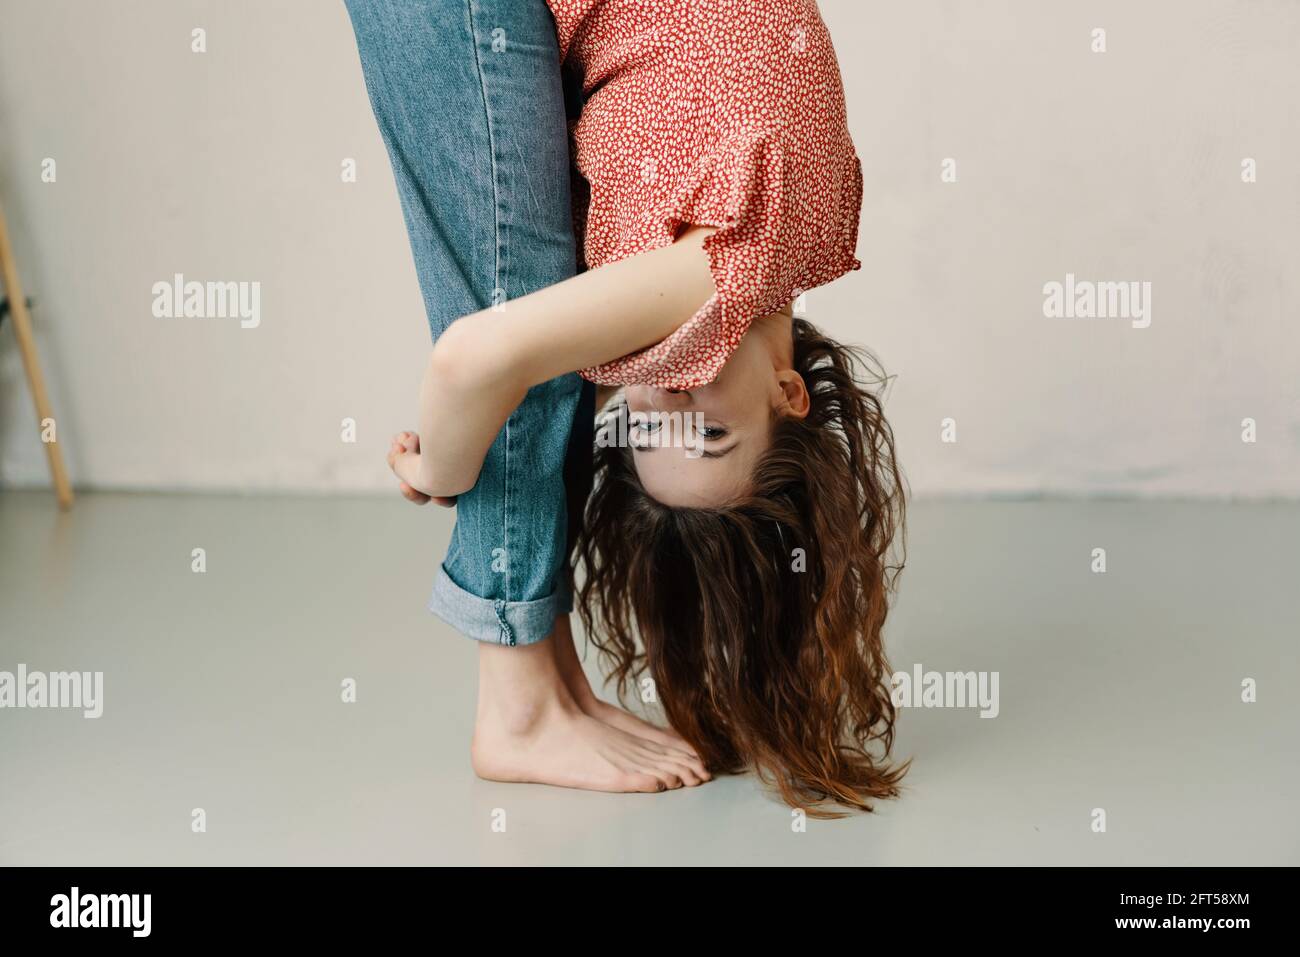 Supple young woman bending forwards to hug her legs as she playfully peeks at the camera during a yoga workout at home in a health and fitness concept Stock Photo